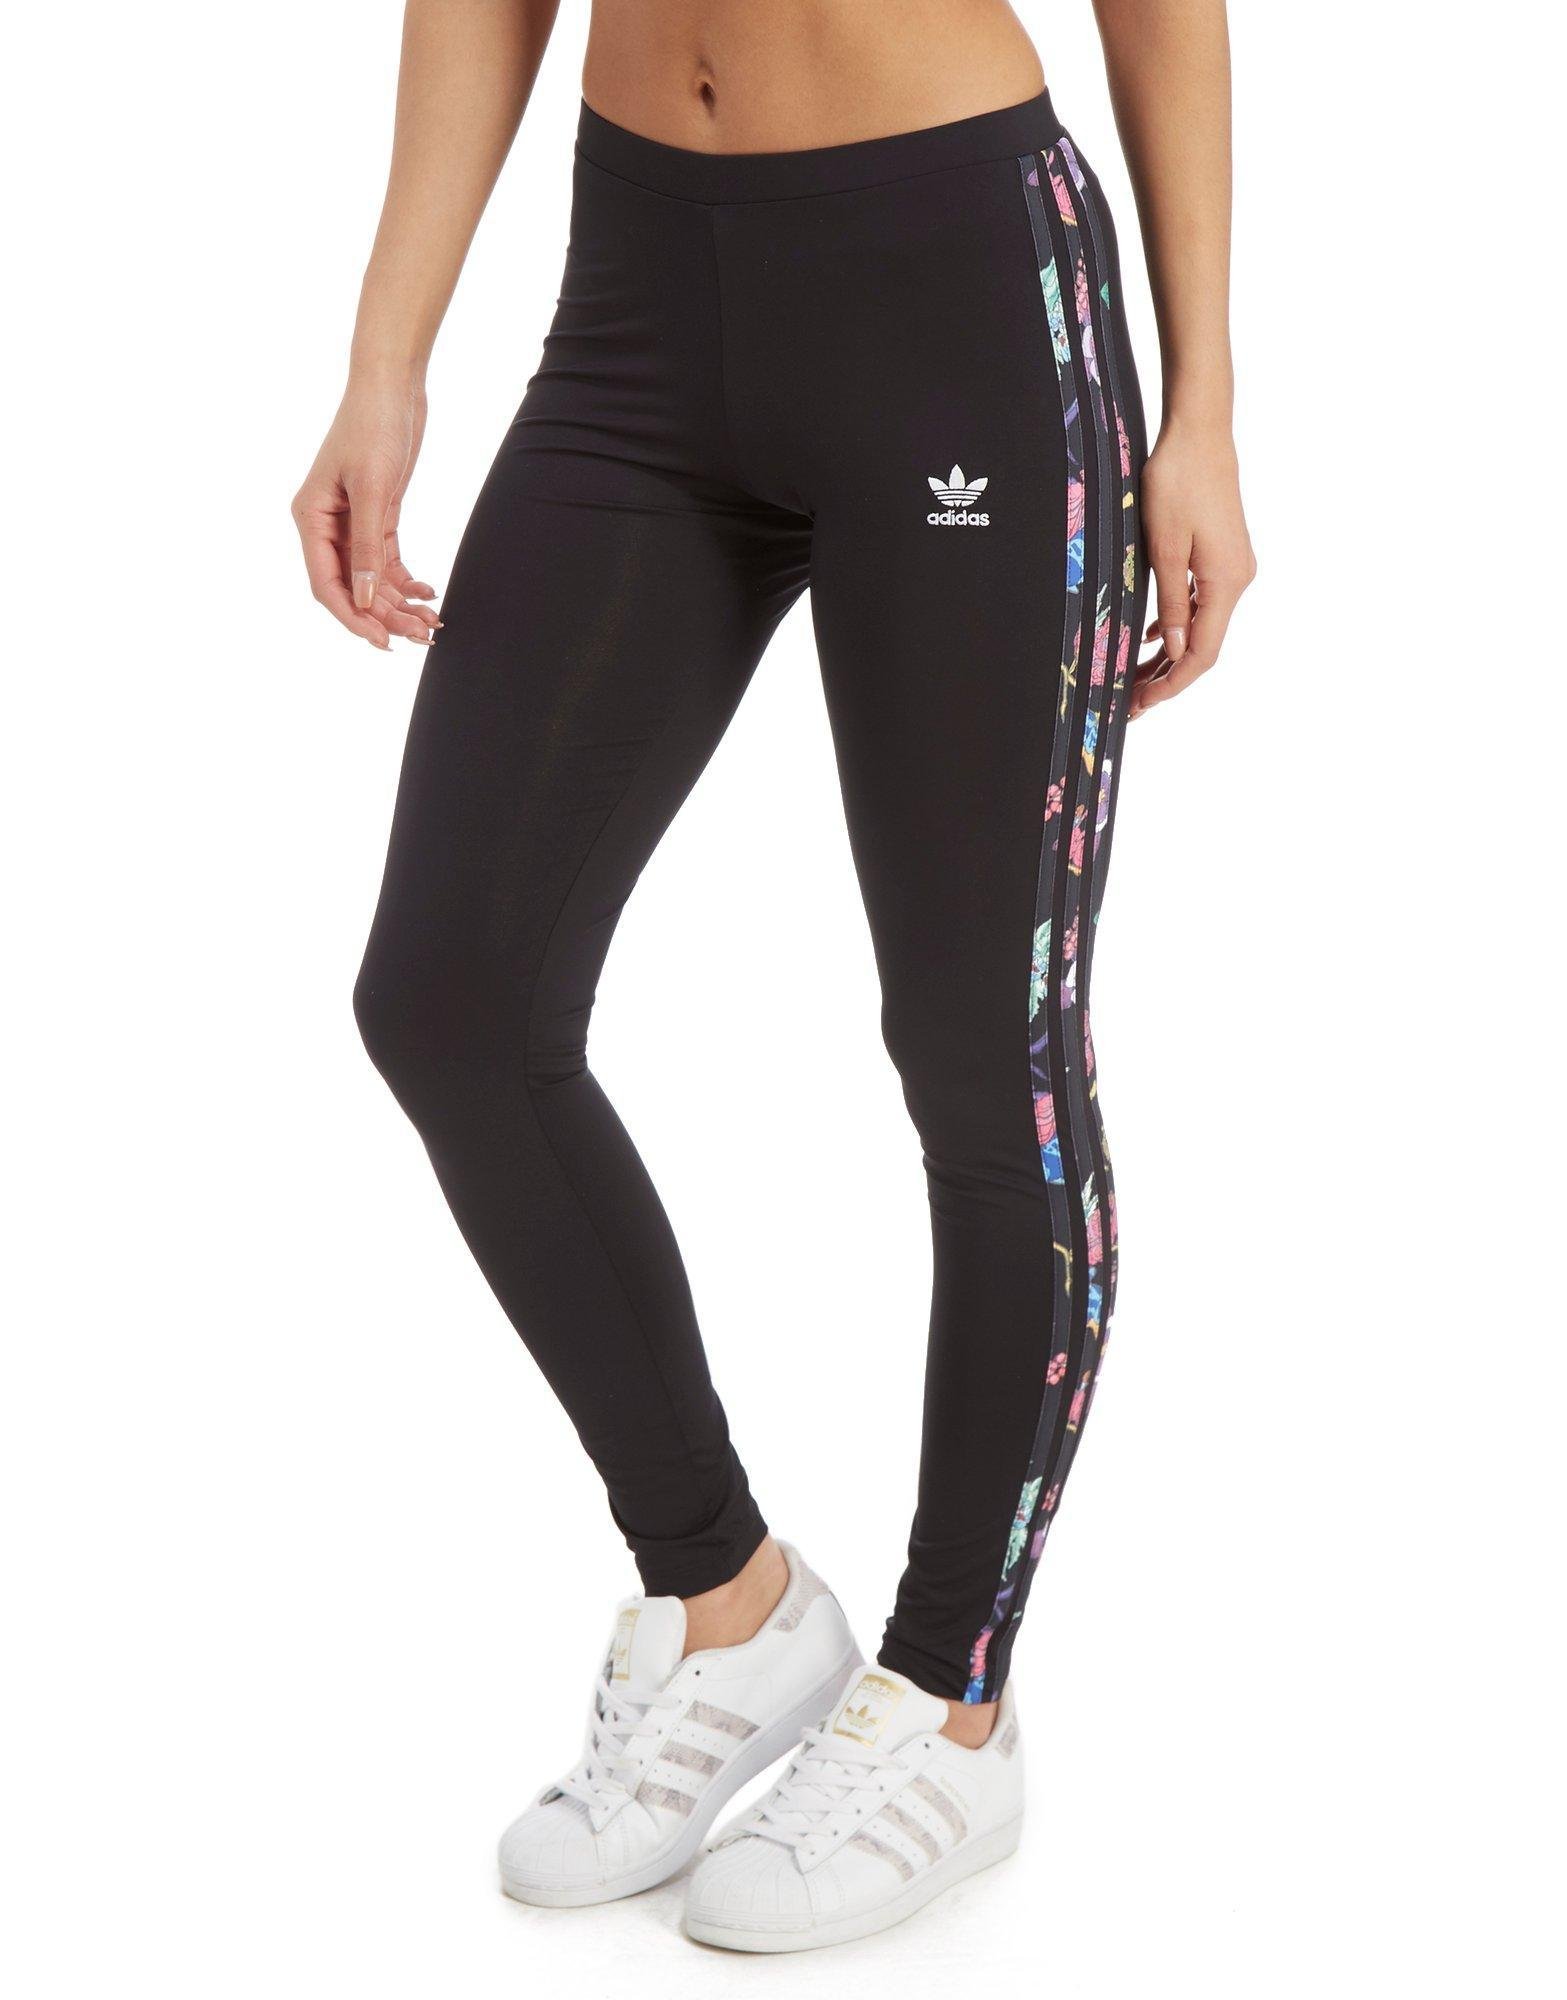 adidas Originals Synthetic 3-stripes Floral Infill Leggings in Black - Lyst